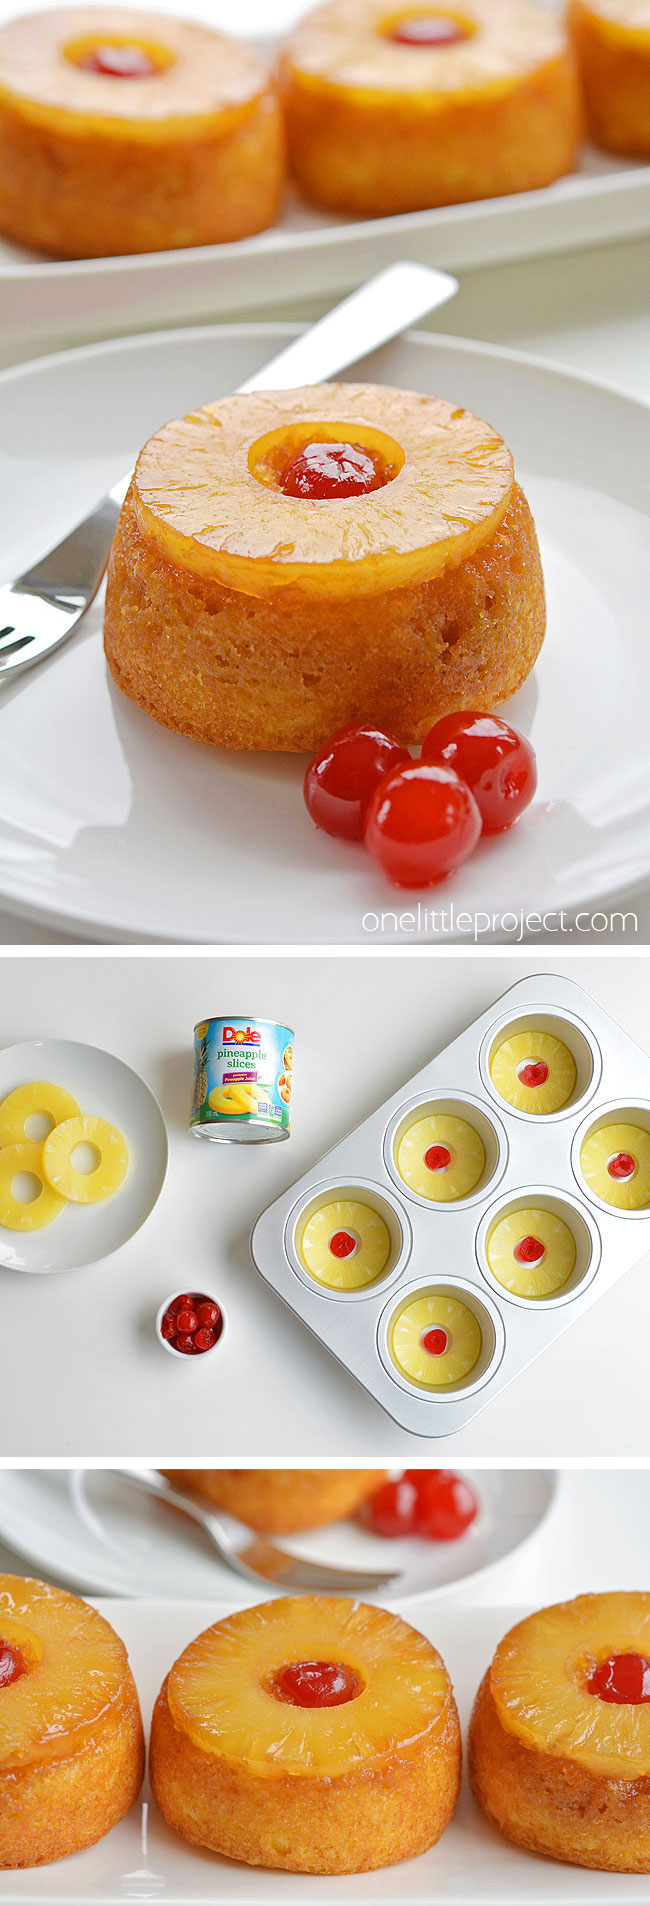 These mini pineapple upside down cakes are so pretty and they're REALLY SIMPLE to make! This is such an easy dessert recipe that is simple enough to make at the last minute on a weeknight but beautiful (and DELICIOUS!) enough to serve to guests! That warm, gooey glaze that comes out with the pineapple is soooooo good!!